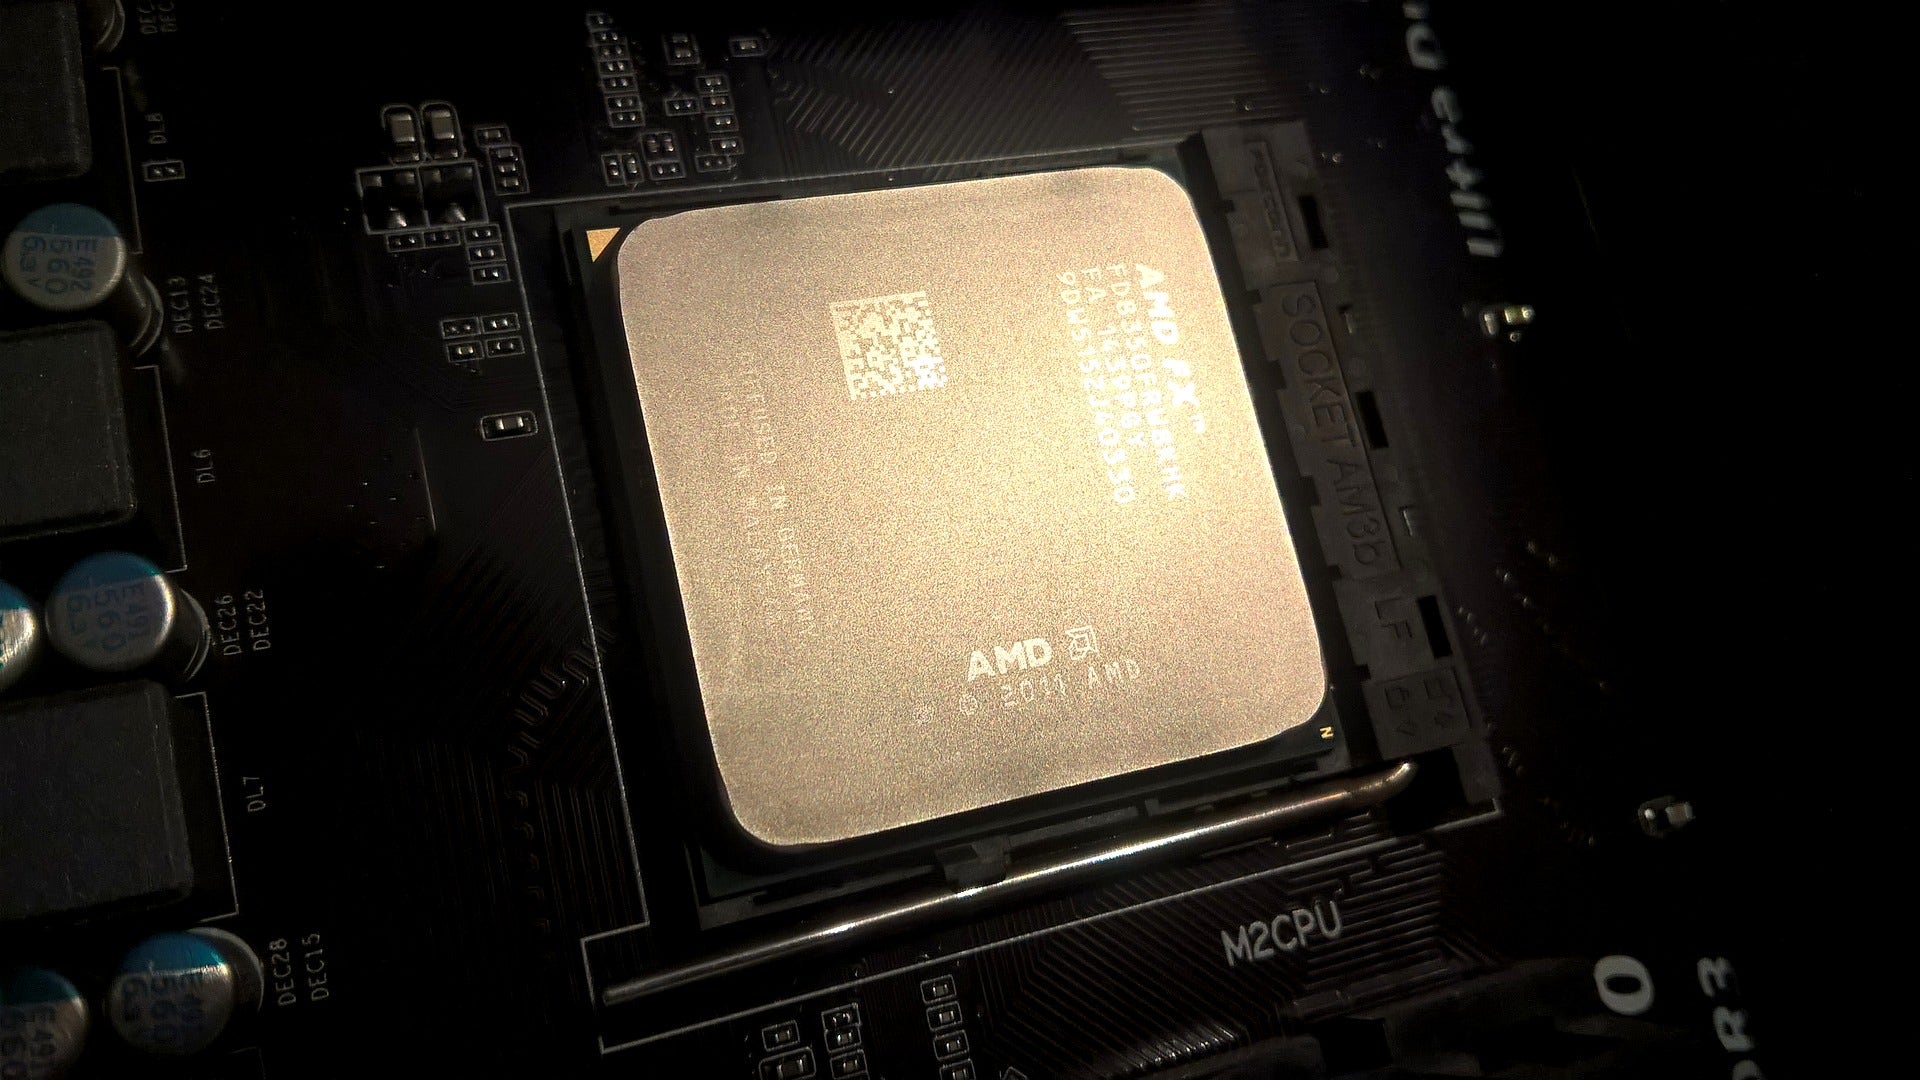 Analyst: Google Cloud Could Drop Intel For AMD